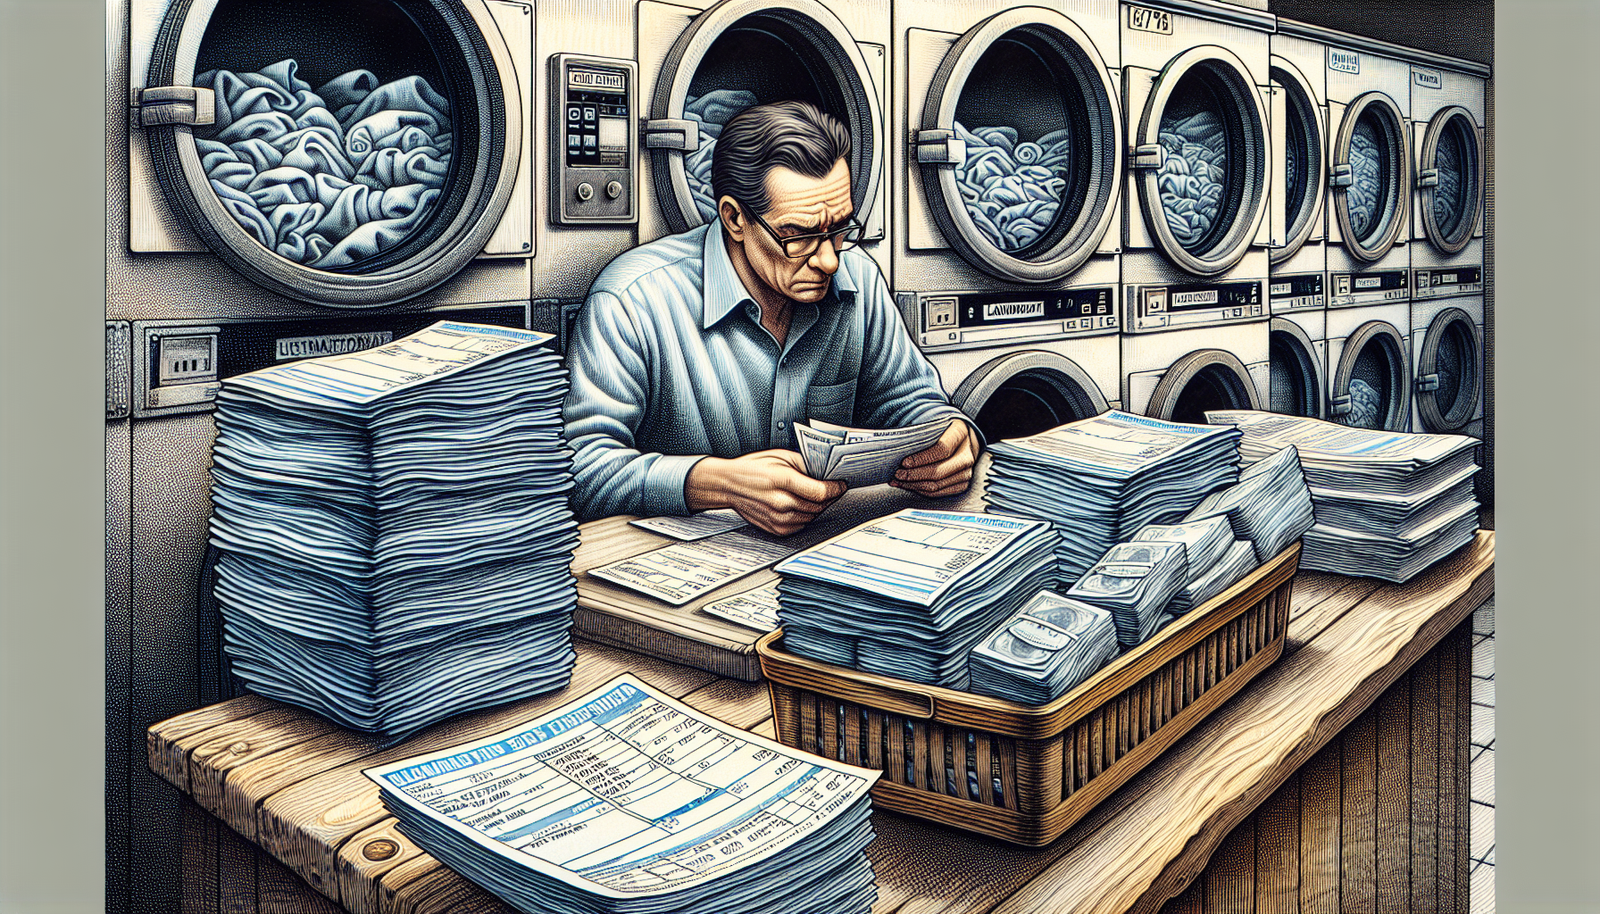 Illustration of a laundromat owner reviewing utility bills and expenses